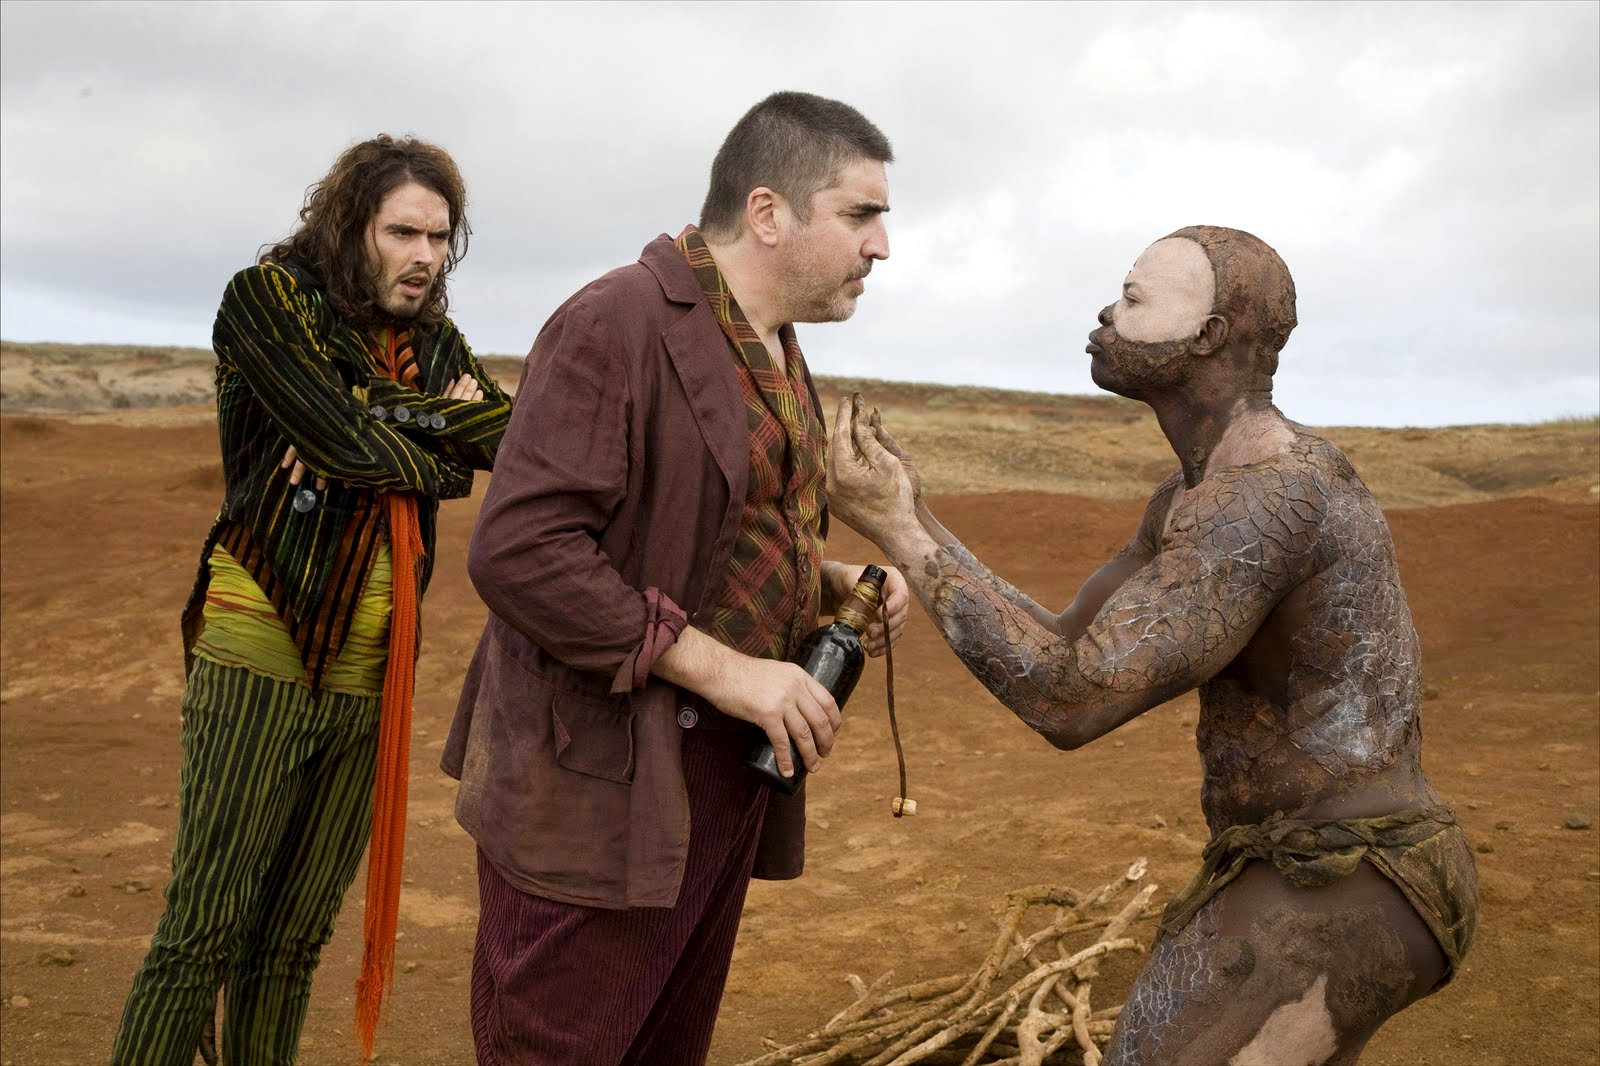 Russell Brand stars as Trinculo and Alfred Molina stars as Stephano in Touchstone Pictures' The Tempest (2010)